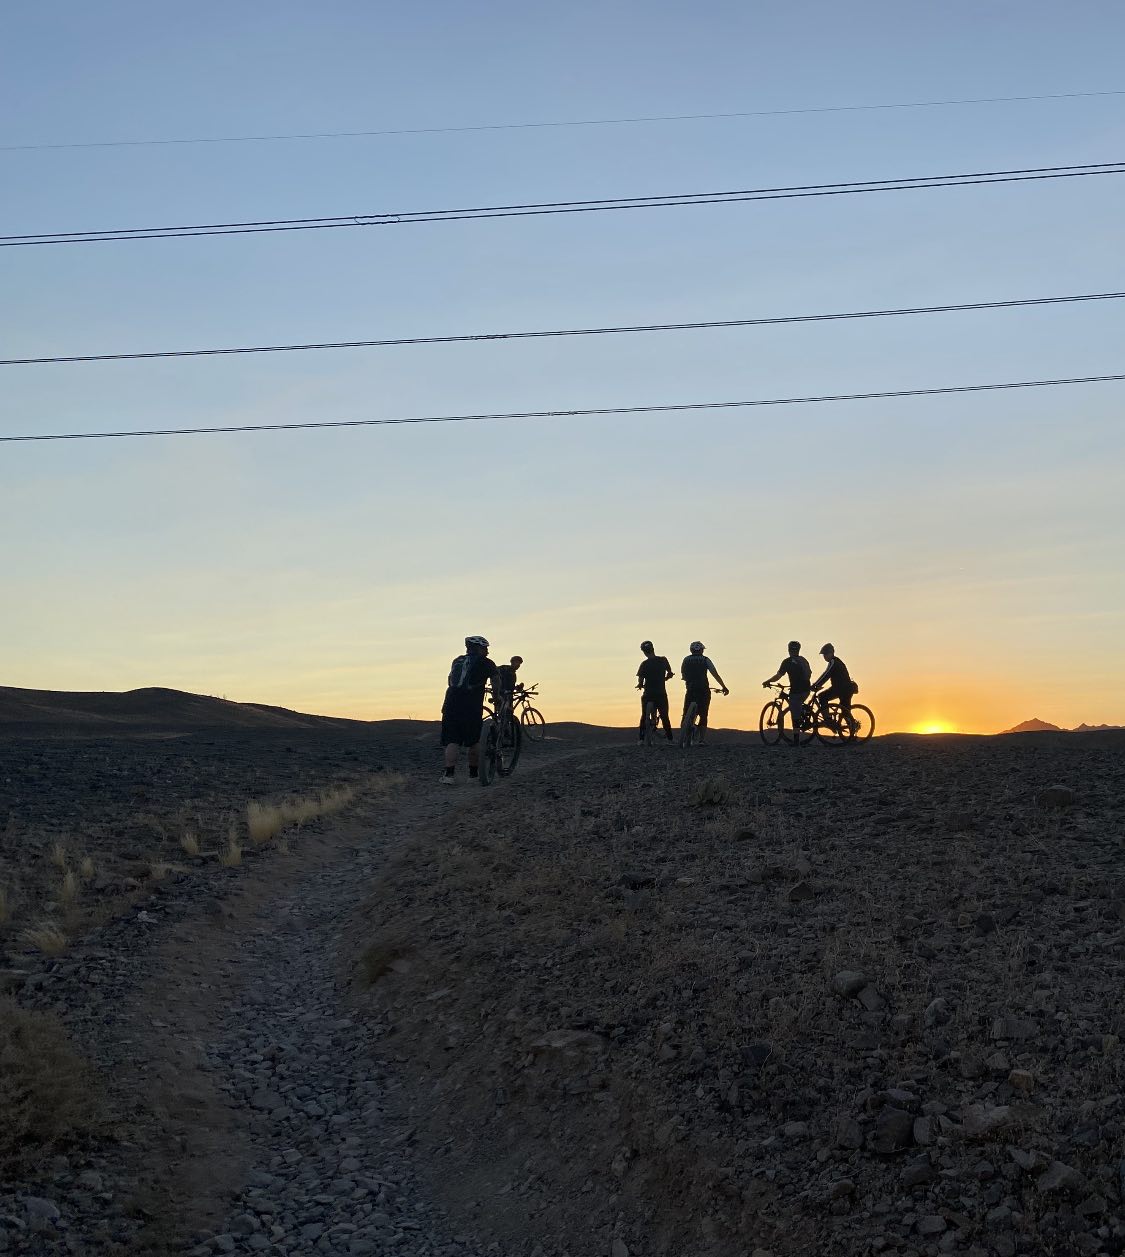 bikerumor pic of the day a group of cyclists gather at the top of a hill there is the sun peeking out from beyond their silhouettes with a blue sky above.